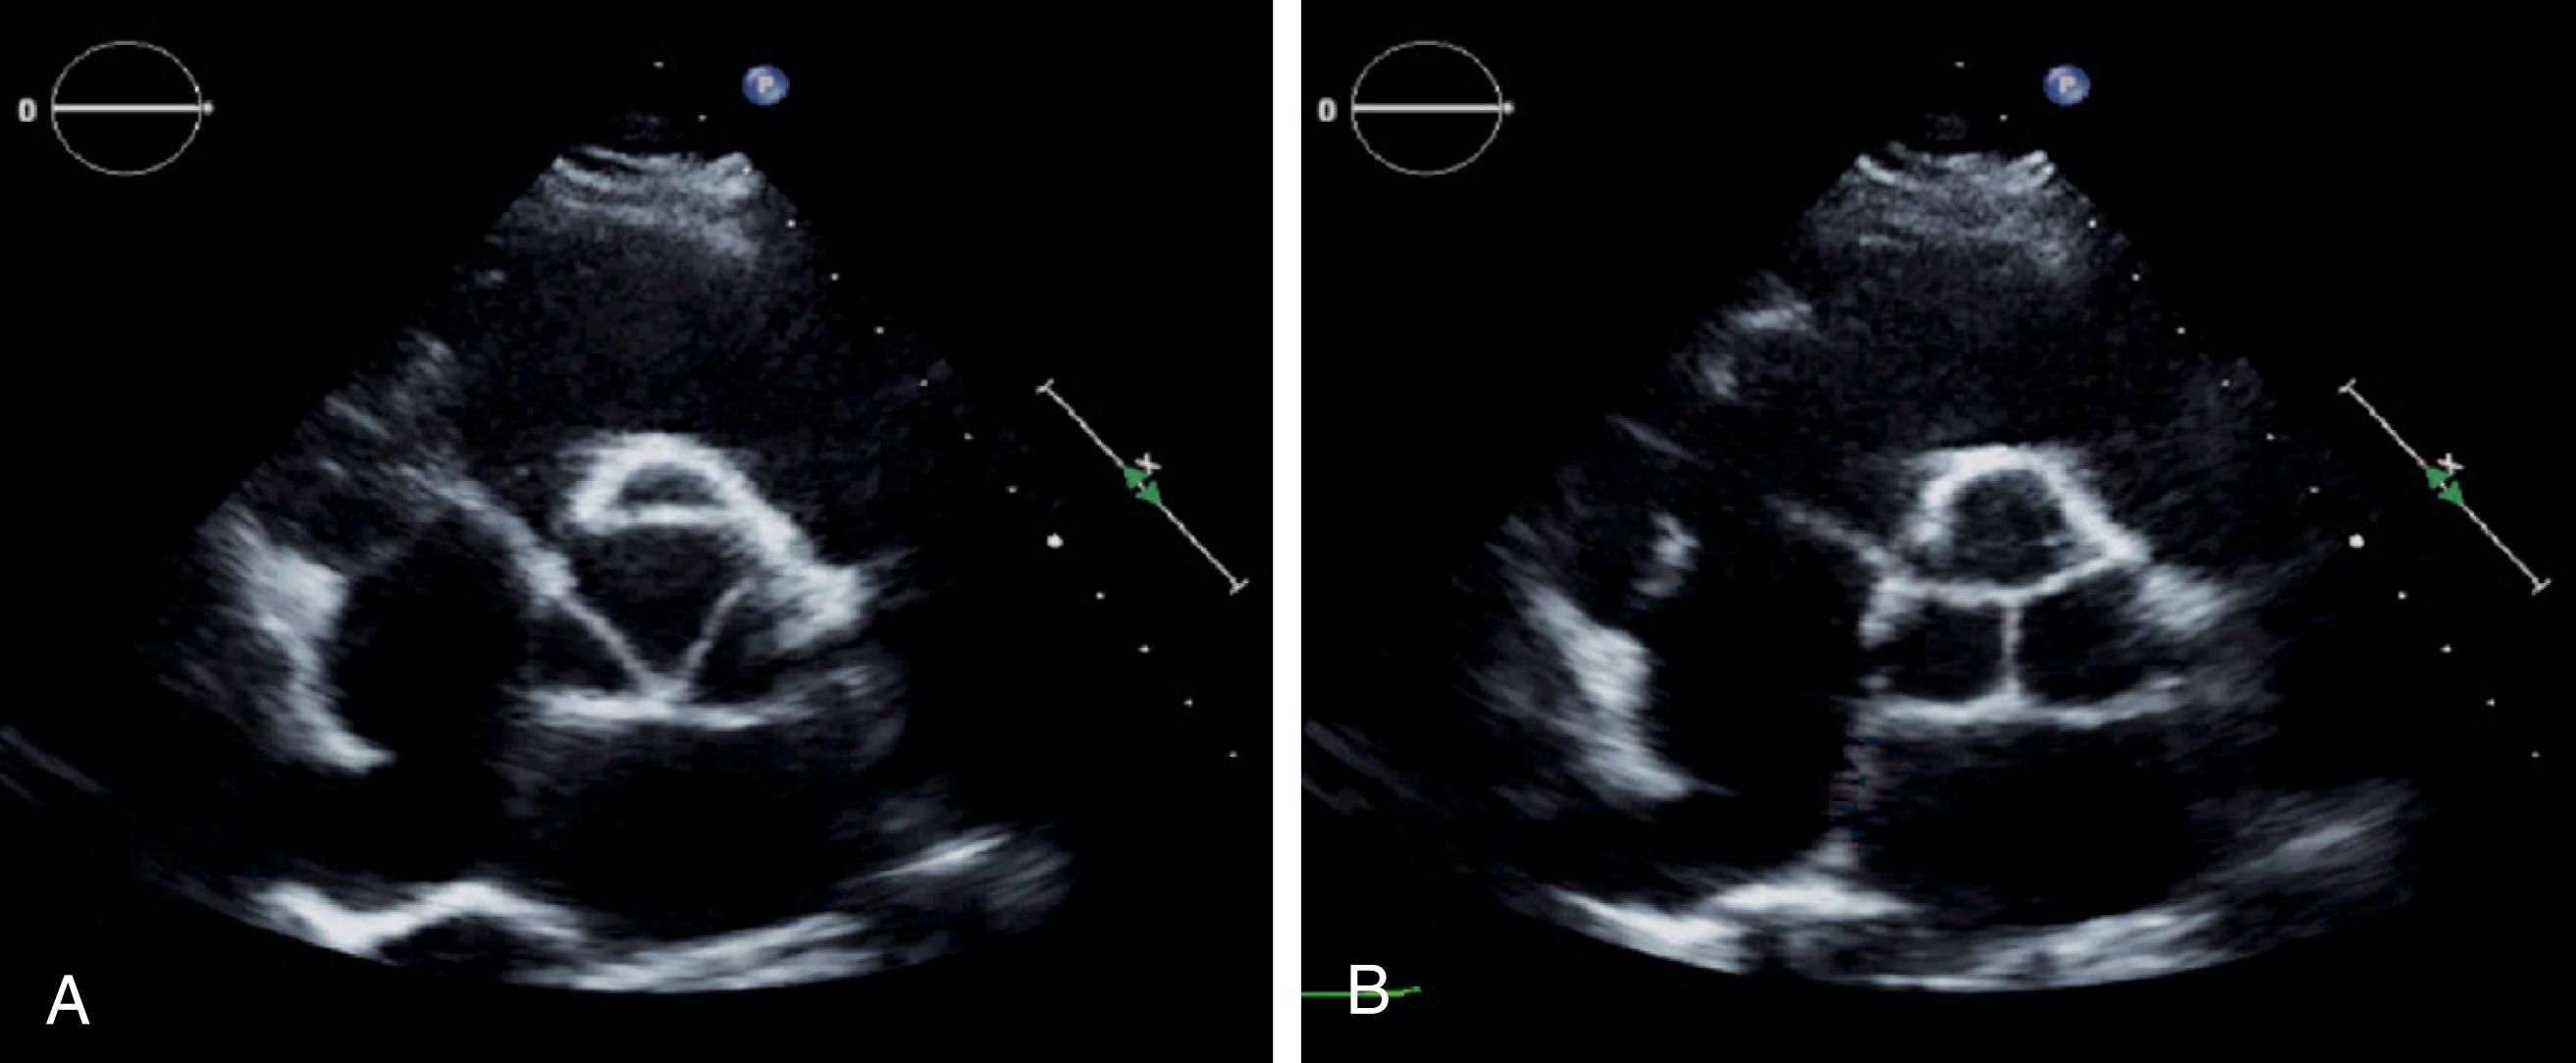 Figure 78.2, Transthoracic echocardiogram (short-axis view) of a normal tricuspid aortic valve. A, In diastole, the normal trileaflet valve appears like a Y with the commissures at the 10, 2, and 6 o’clock positions. B, In systole, the valve opens in a triangular fashion with straightening of the leaflets.